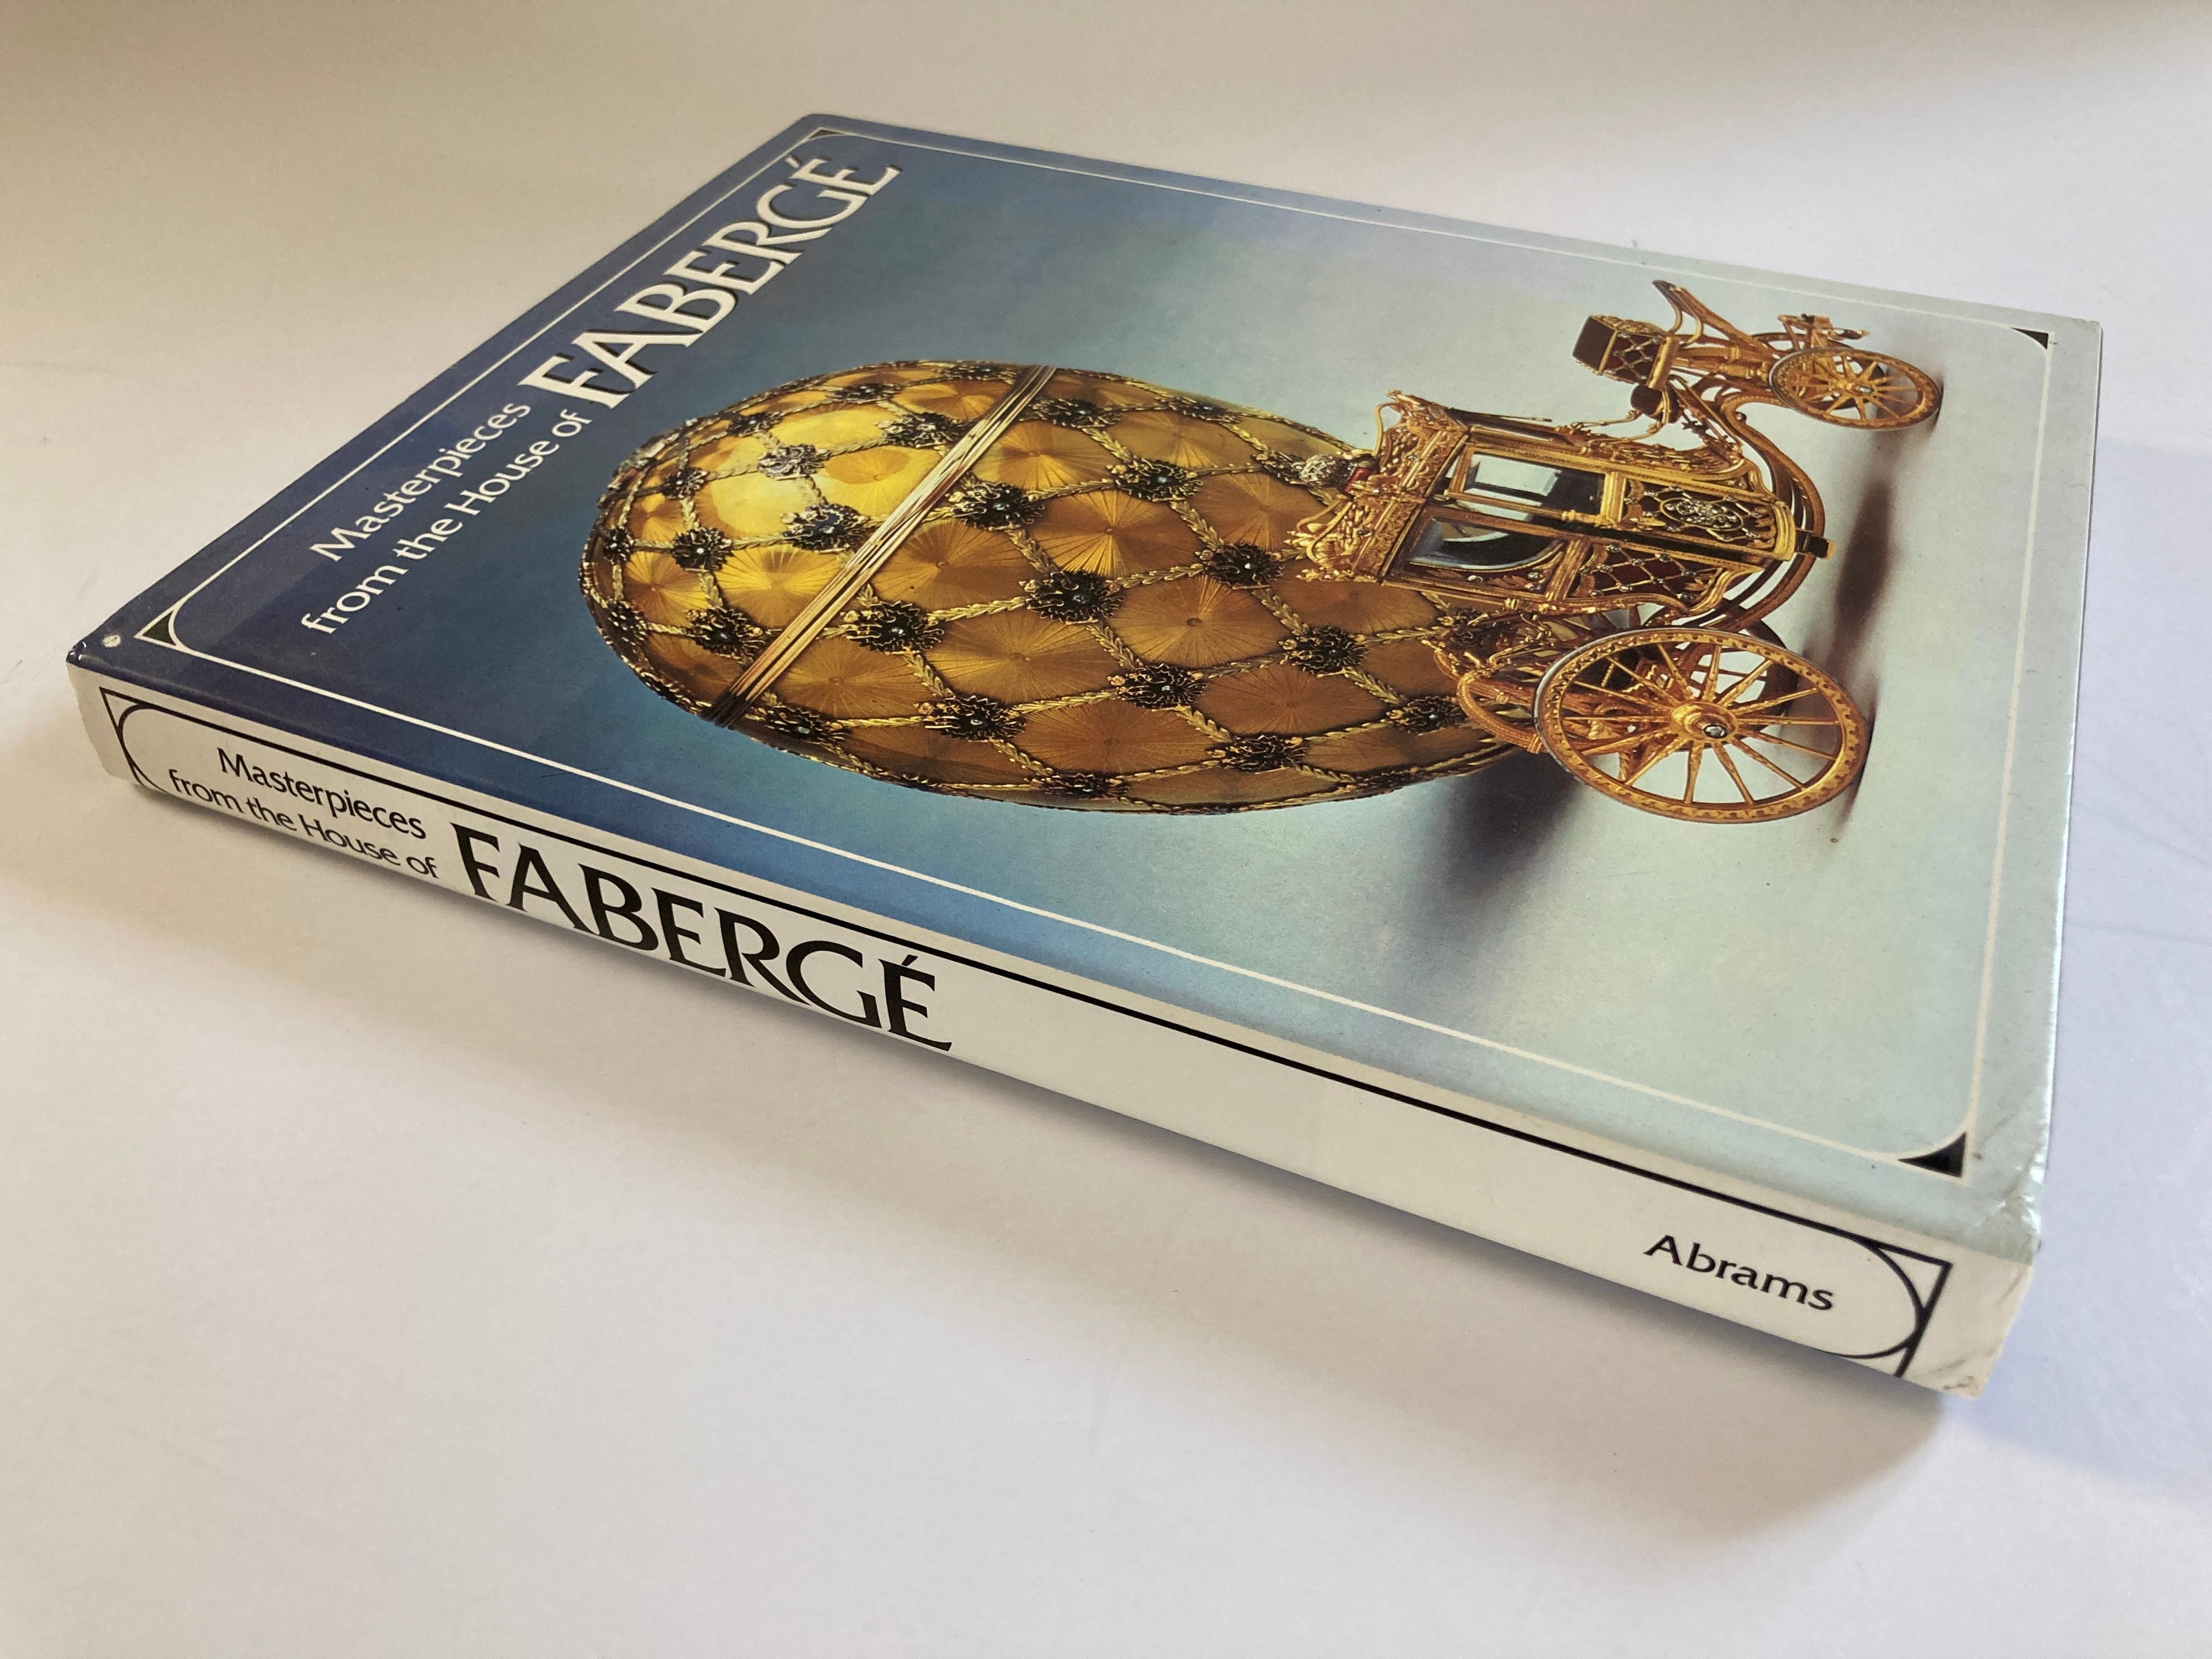 Masterpieces from the House of Faberge
Alexander Von Solodkoff; Roy D. R. Bettley; A. Kenneth Snowman; Marilyn Pfeifer Swezey; Editor-Paul Schaffer; Editor-Christopher Forbes
A book on the history of Carl Fabergé and his work. For more than 35